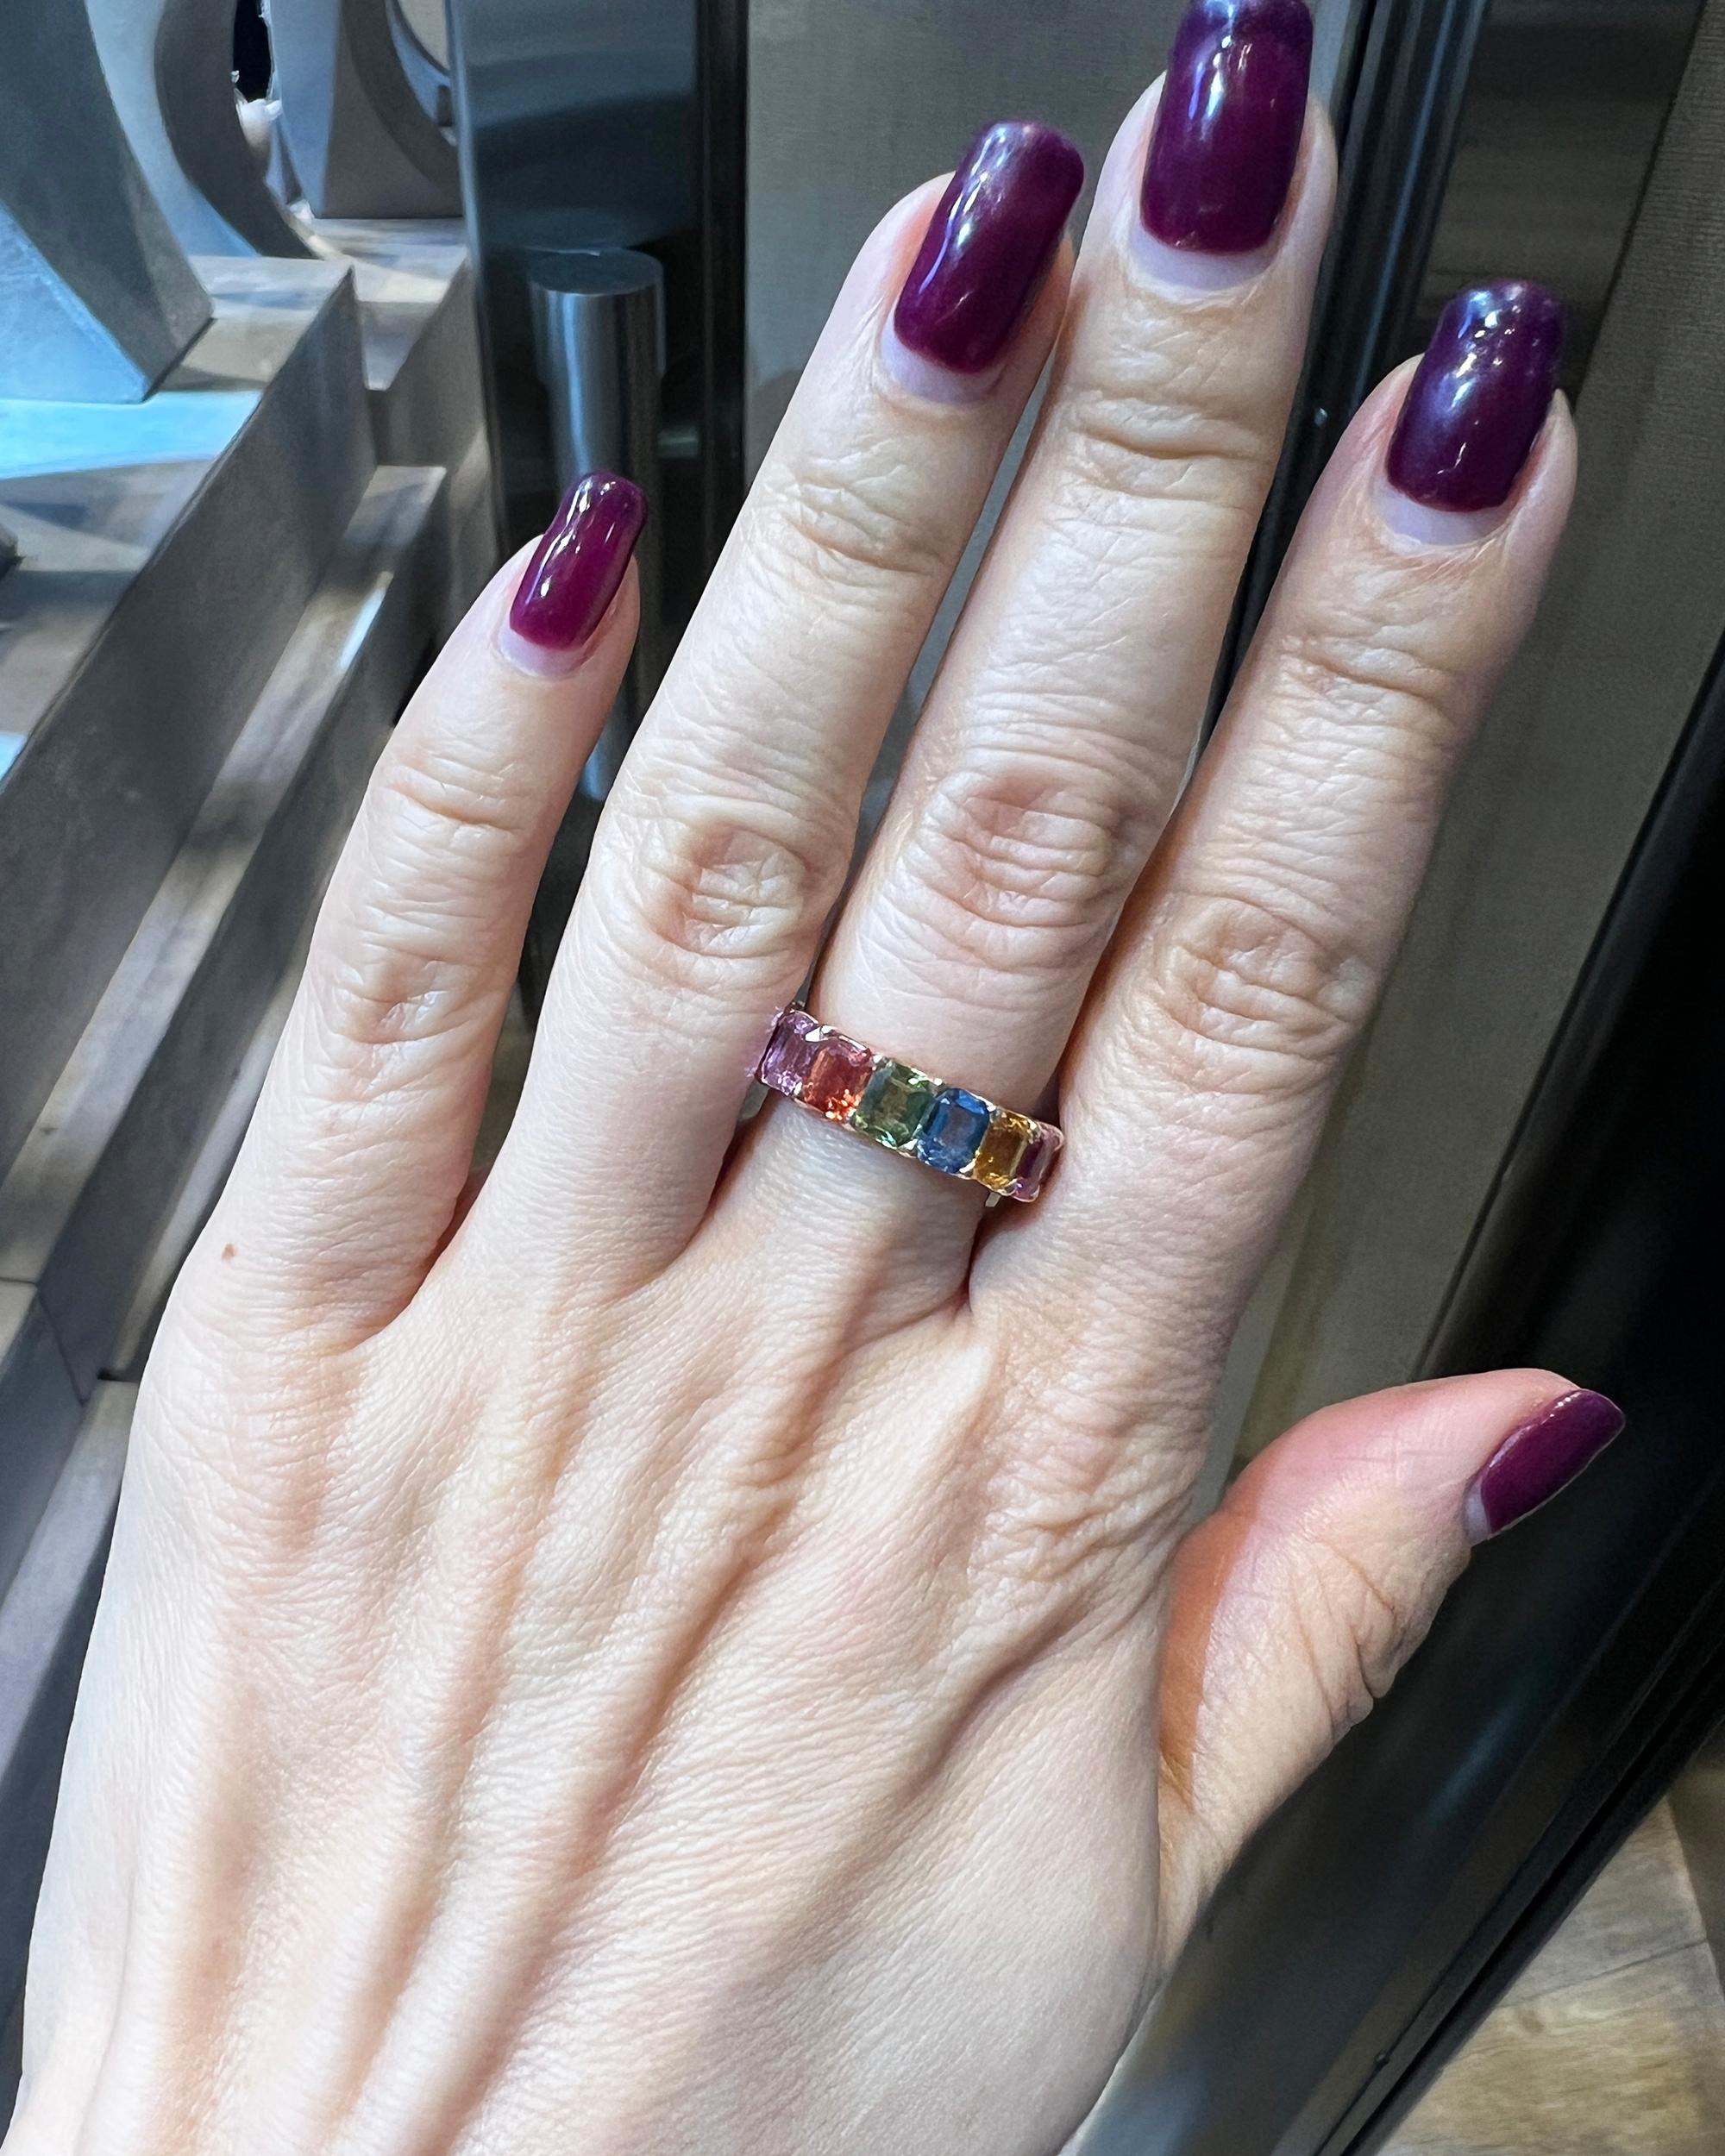 A stylish eternity band comprising of 17 all natural emerald-cut multicolored sapphires weighing a total of 9.34 carats. The weight of each stone is 0.55 carat.
Metal is 18k rose gold, gross weight 6.18 grams.
Size of the ring is 6.5. Not sizable.